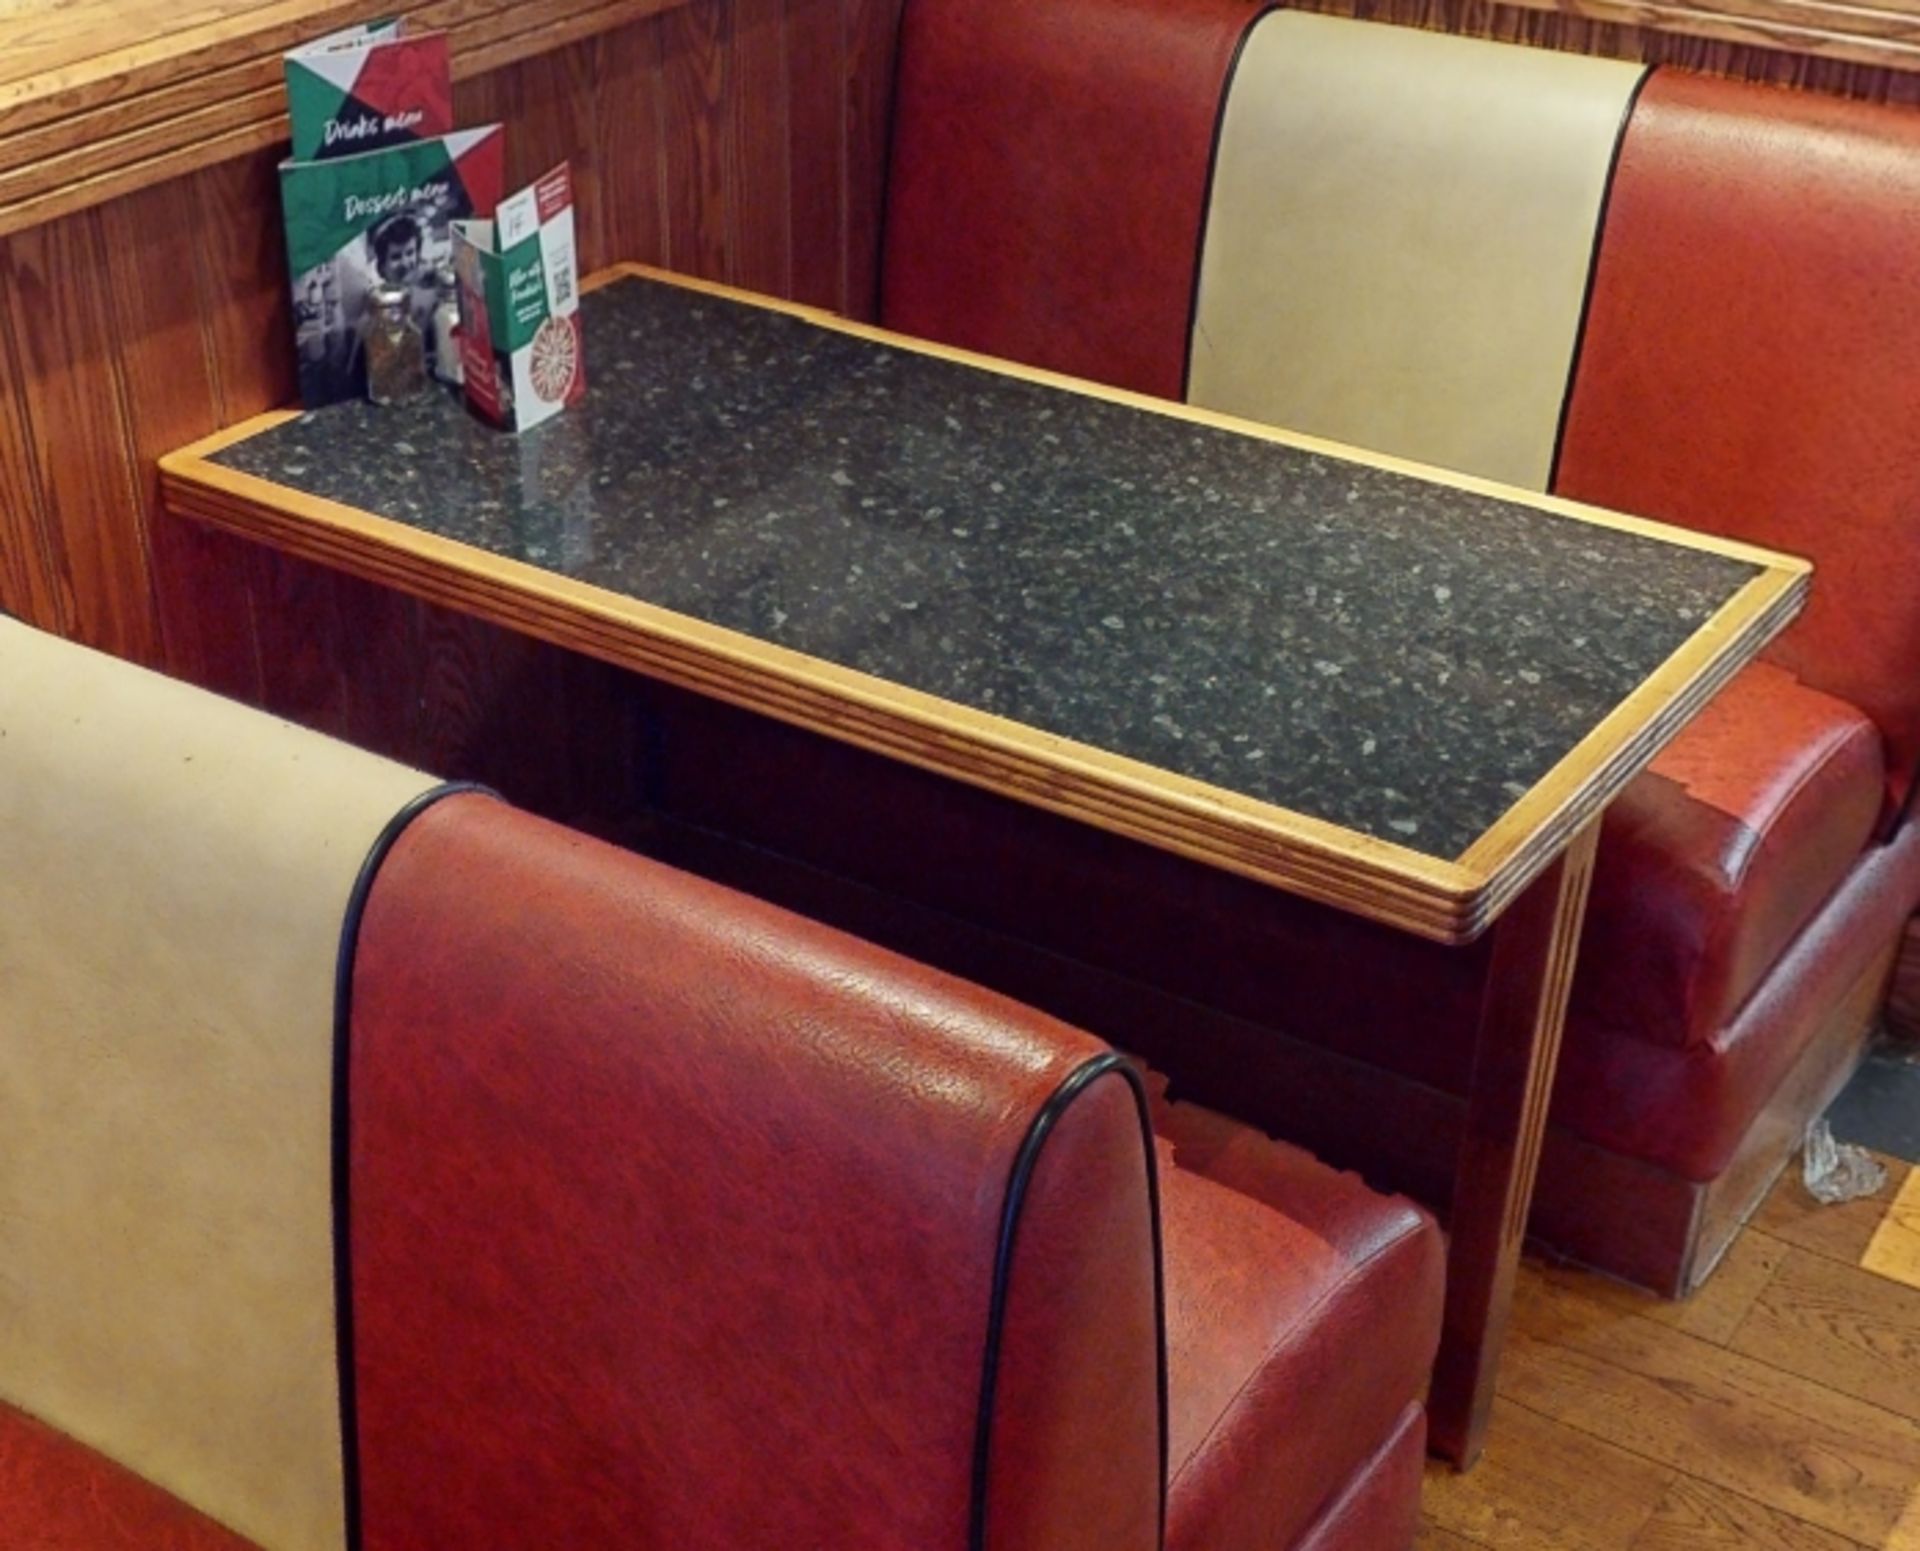 1 x Selection of Double Seating Benches and Dining Tables to Seat Upto 12 Persons - Retro 1950's - Image 3 of 5